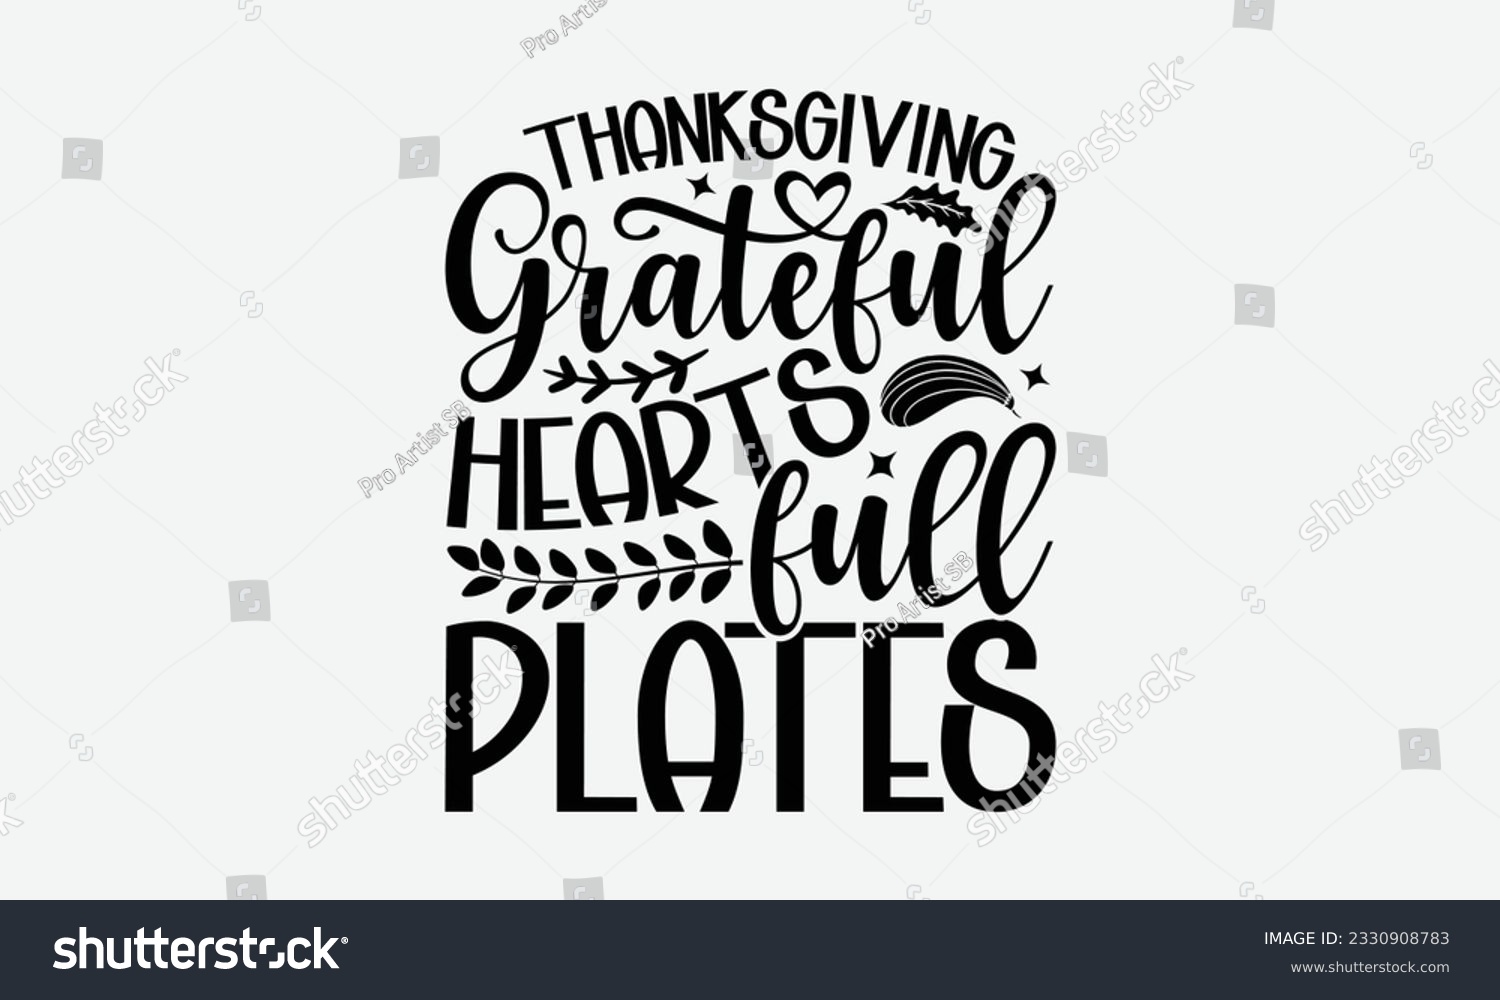 SVG of Thanksgiving Grateful Hearts Full Plates - Thanksgiving T-shirt Design Template, Thanksgiving Quotes File, Hand Drawn Lettering Phrase, SVG Files for Cutting Cricut and Silhouette. svg